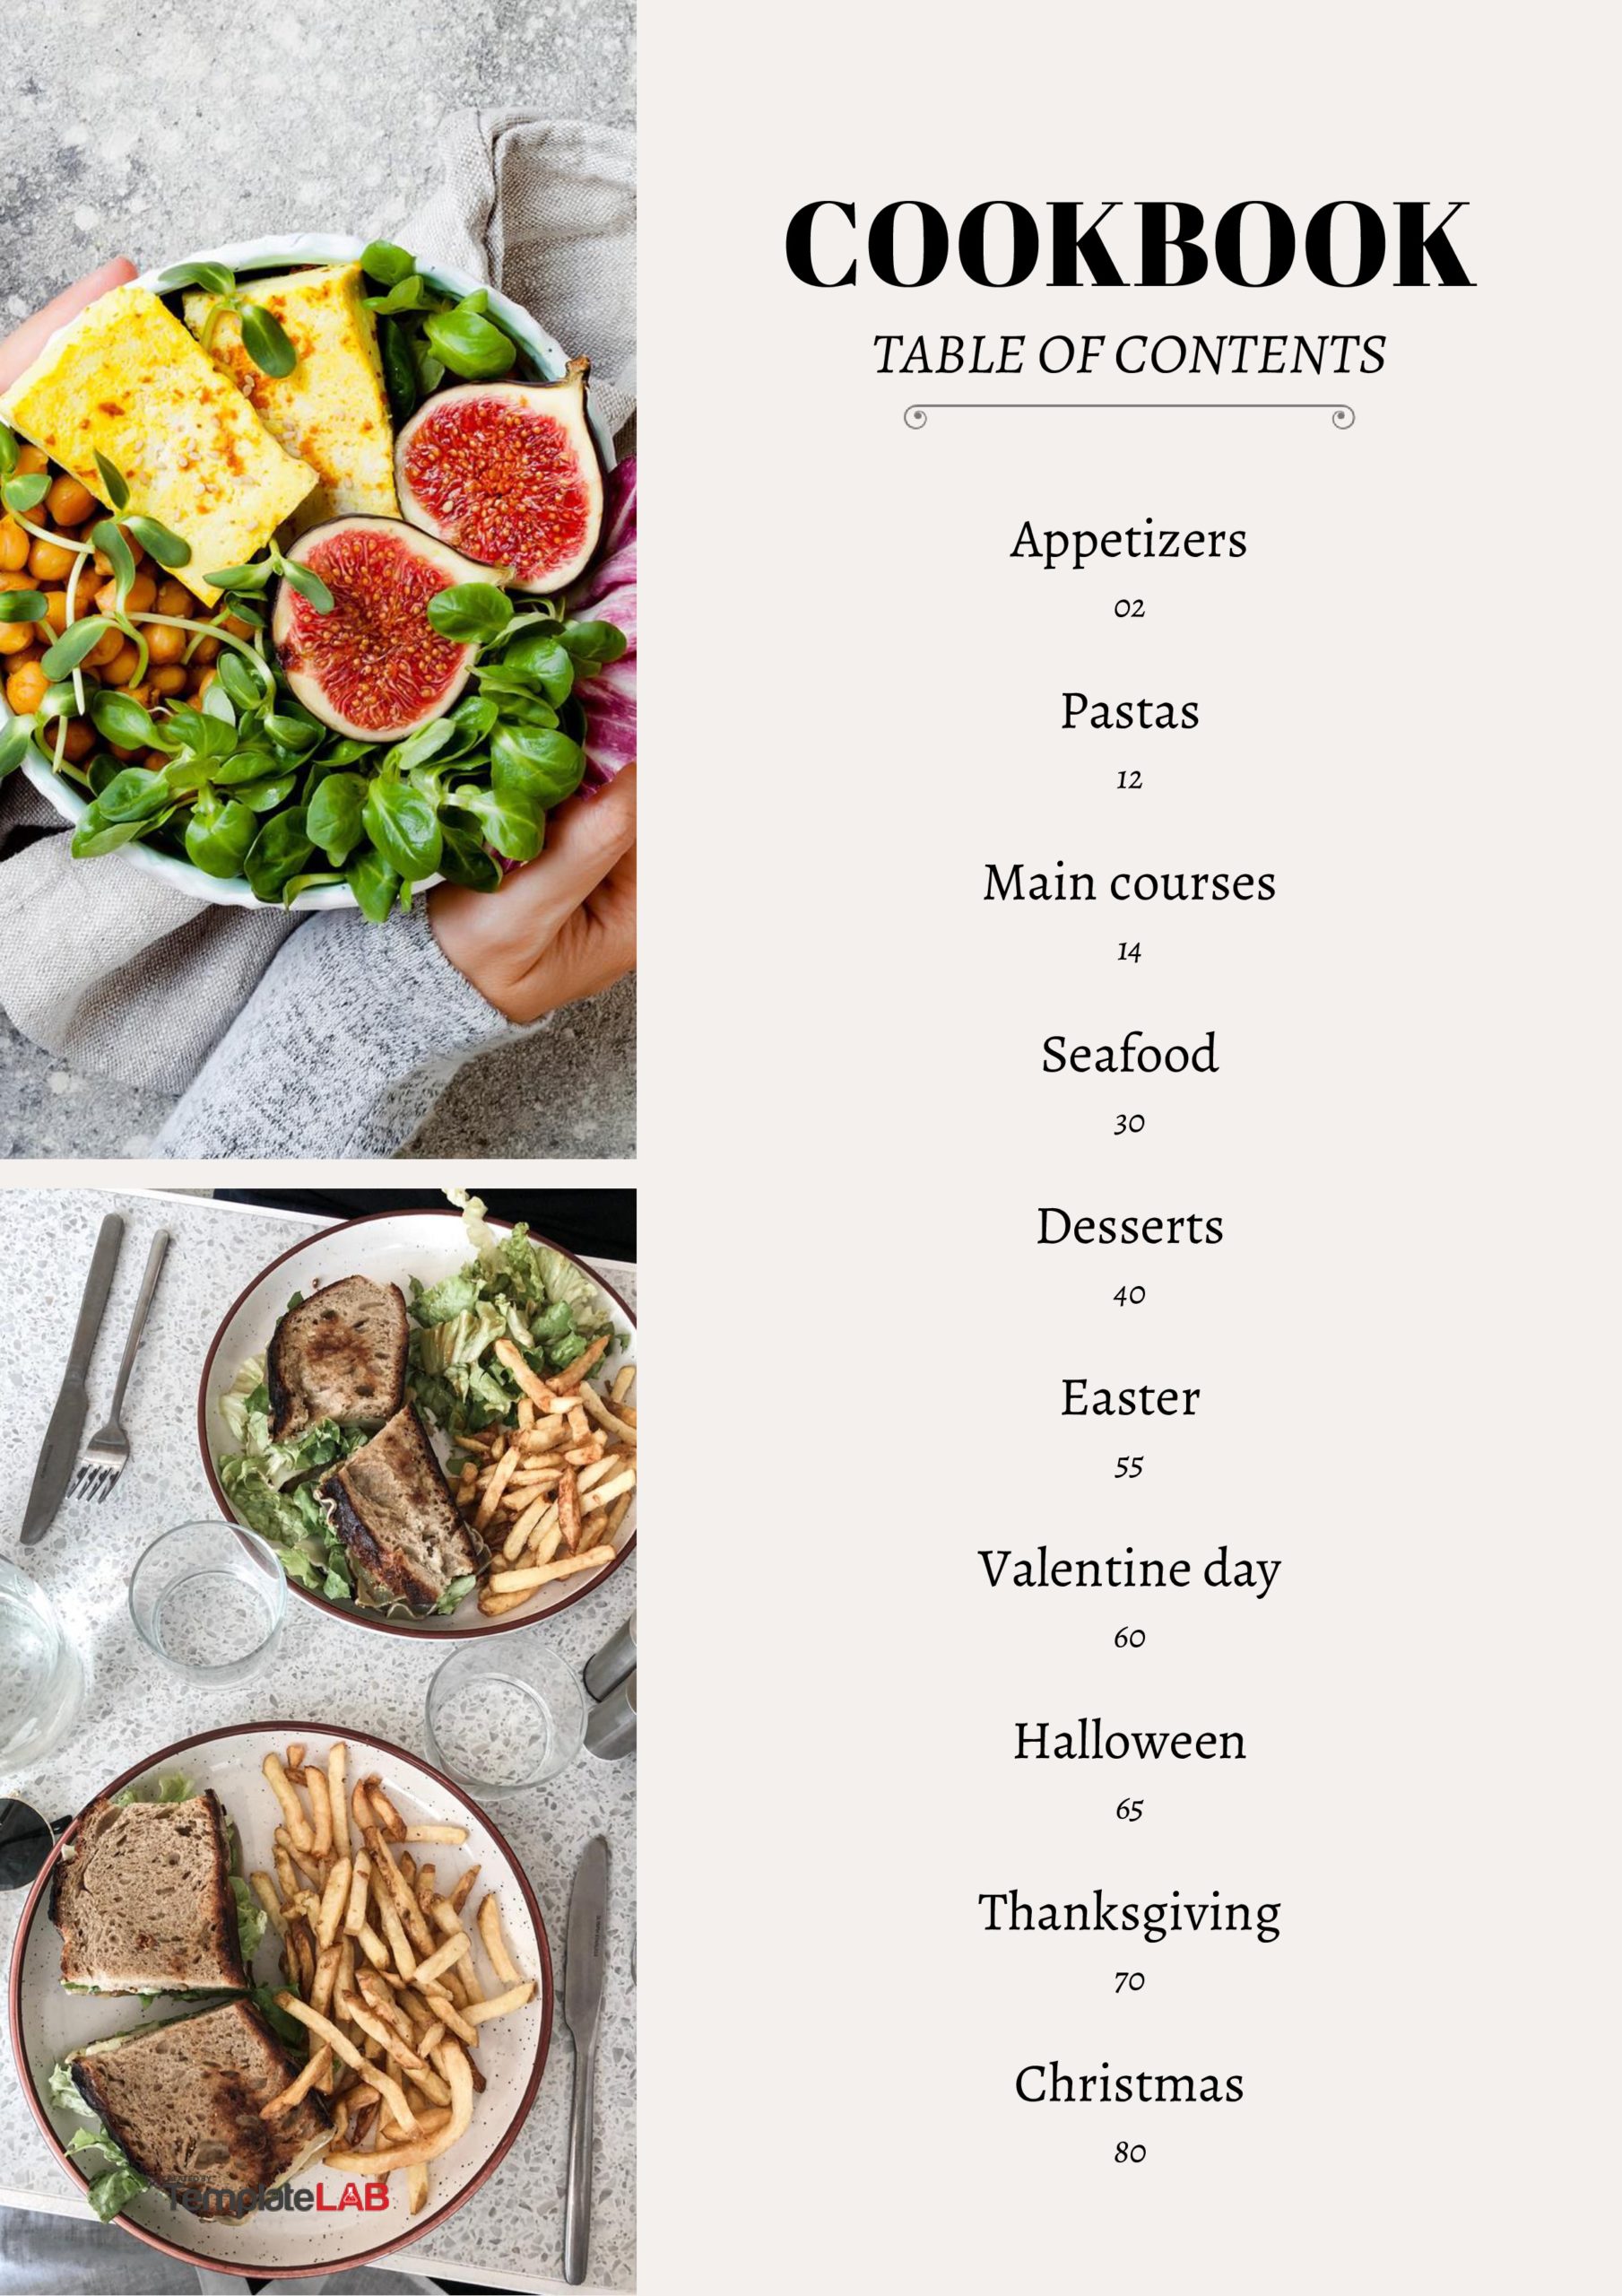 Free Cookbook Table Of Contents Template